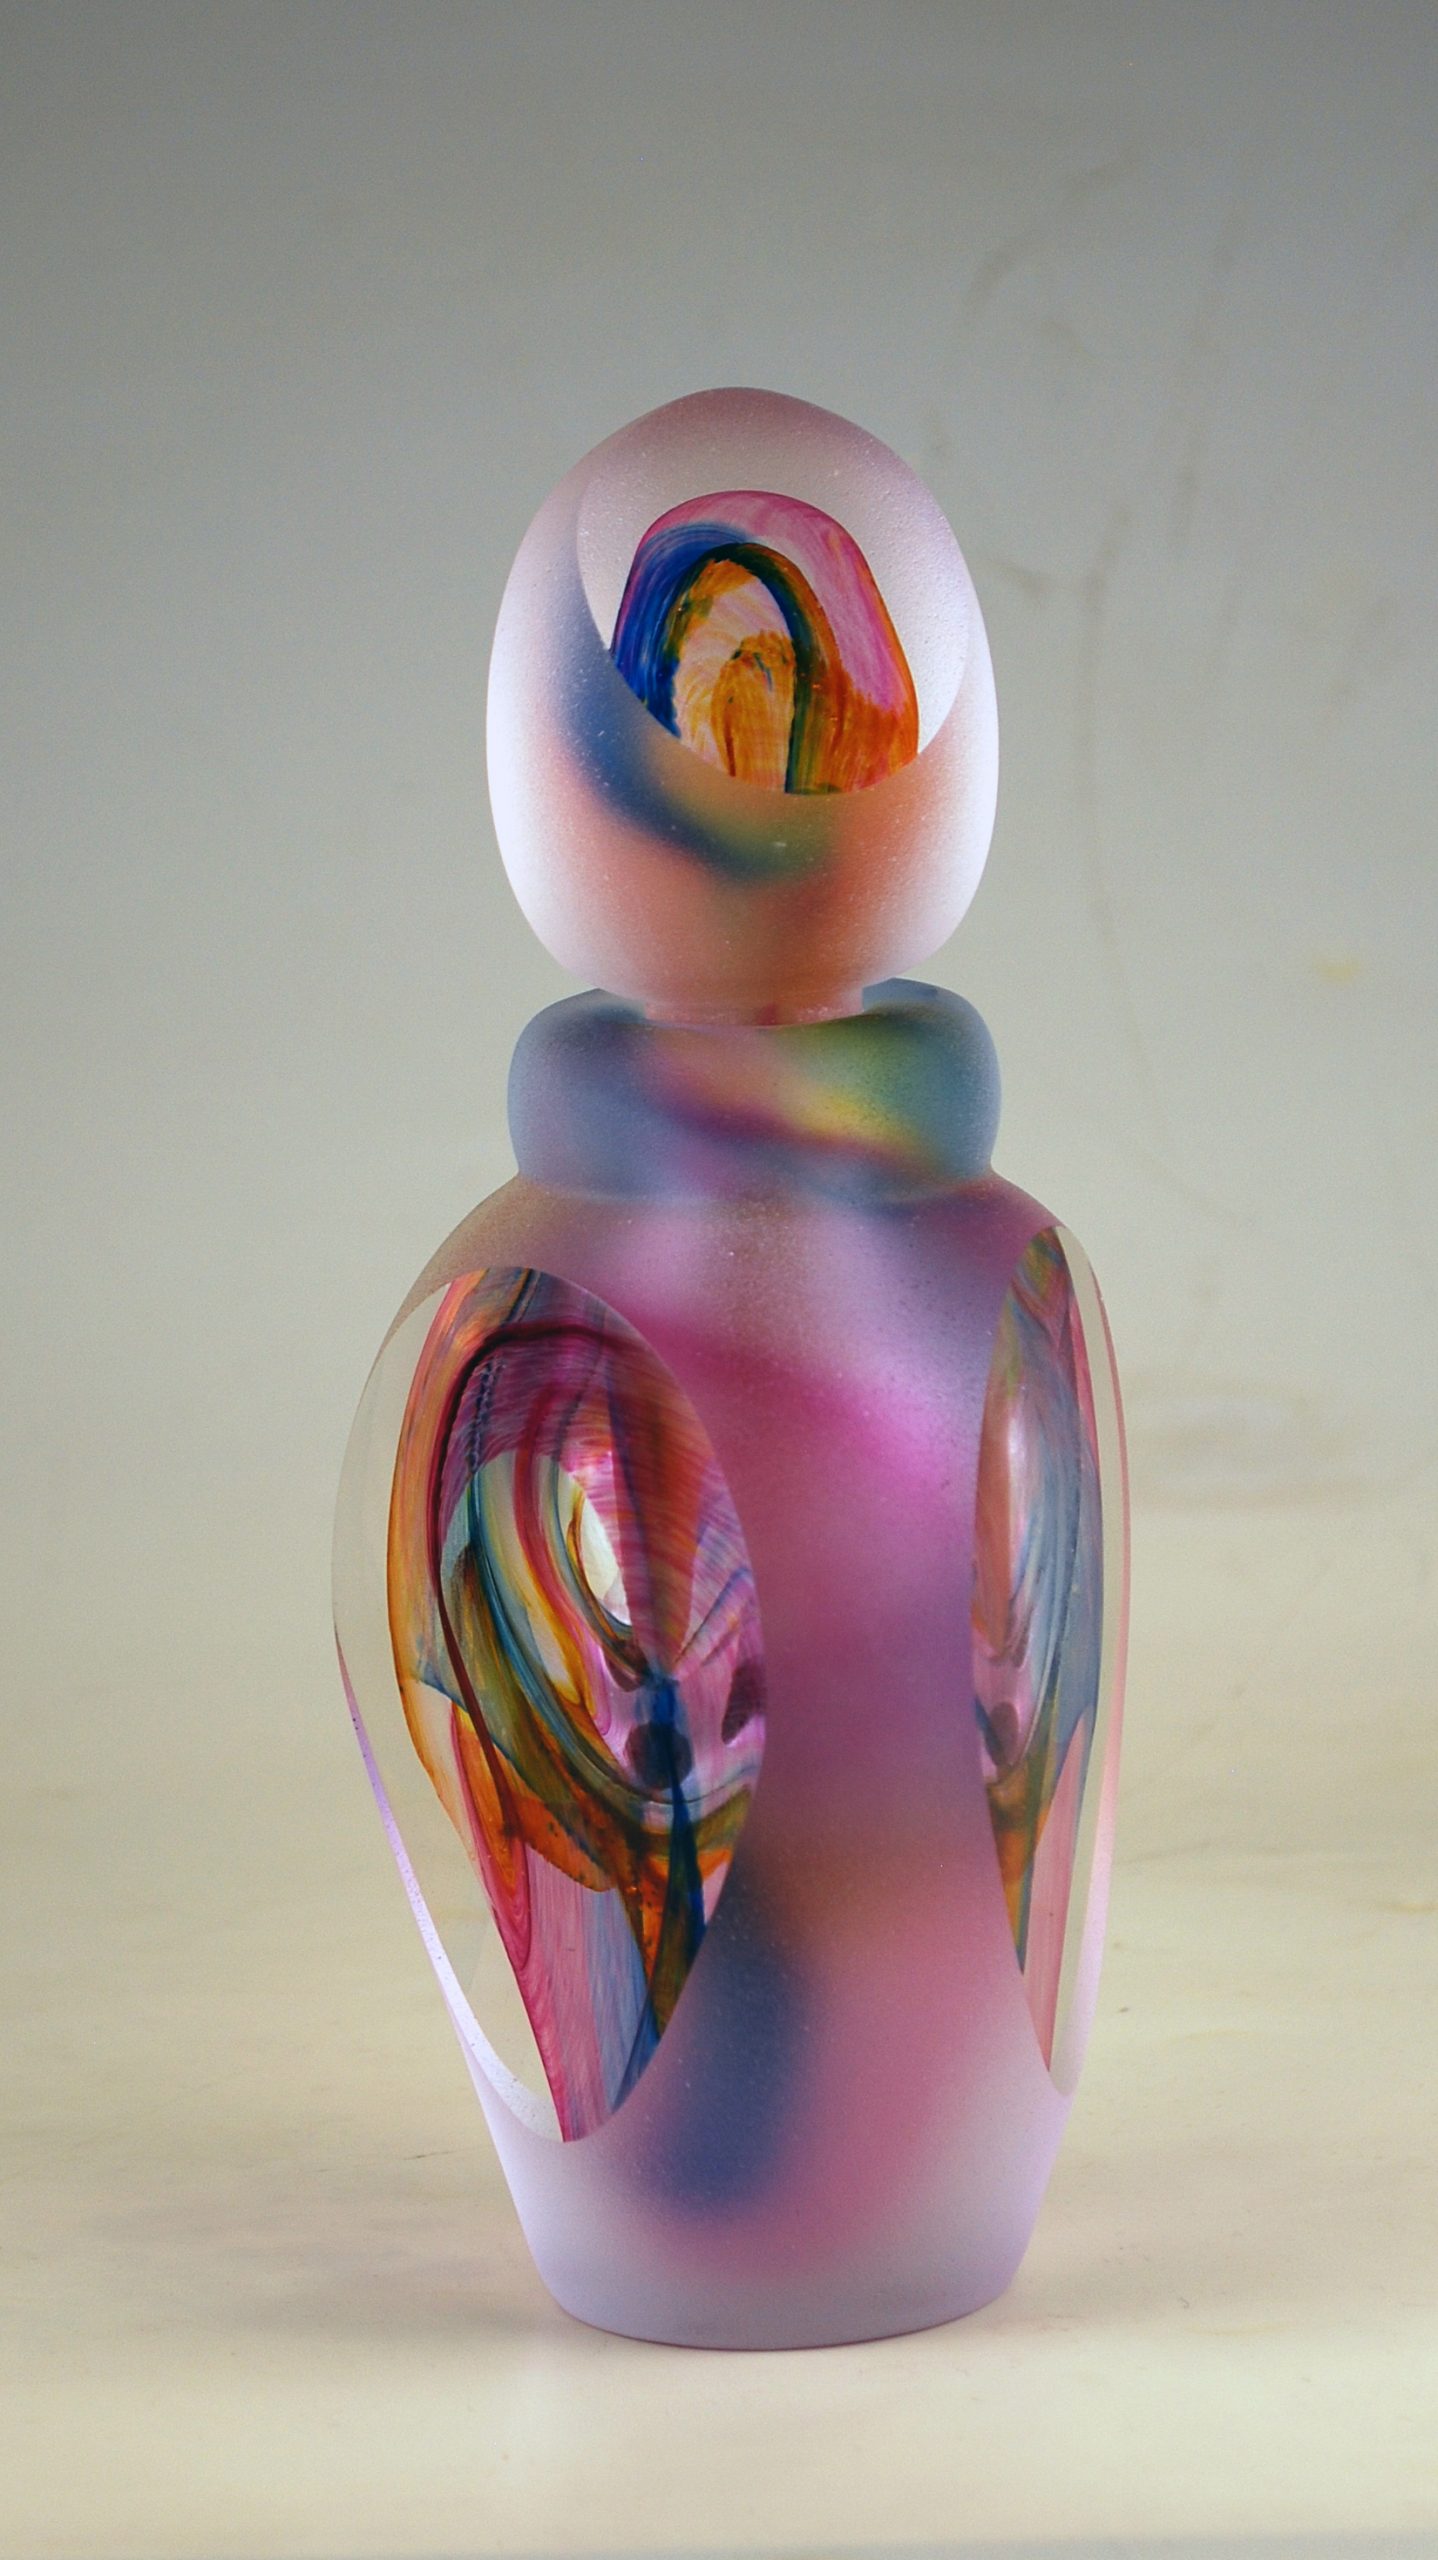 Andrew Shea, Multi-Color Swirl Perfume Bottle, 2020, blown glass, 8.25x3x3 inches, collection of the artist